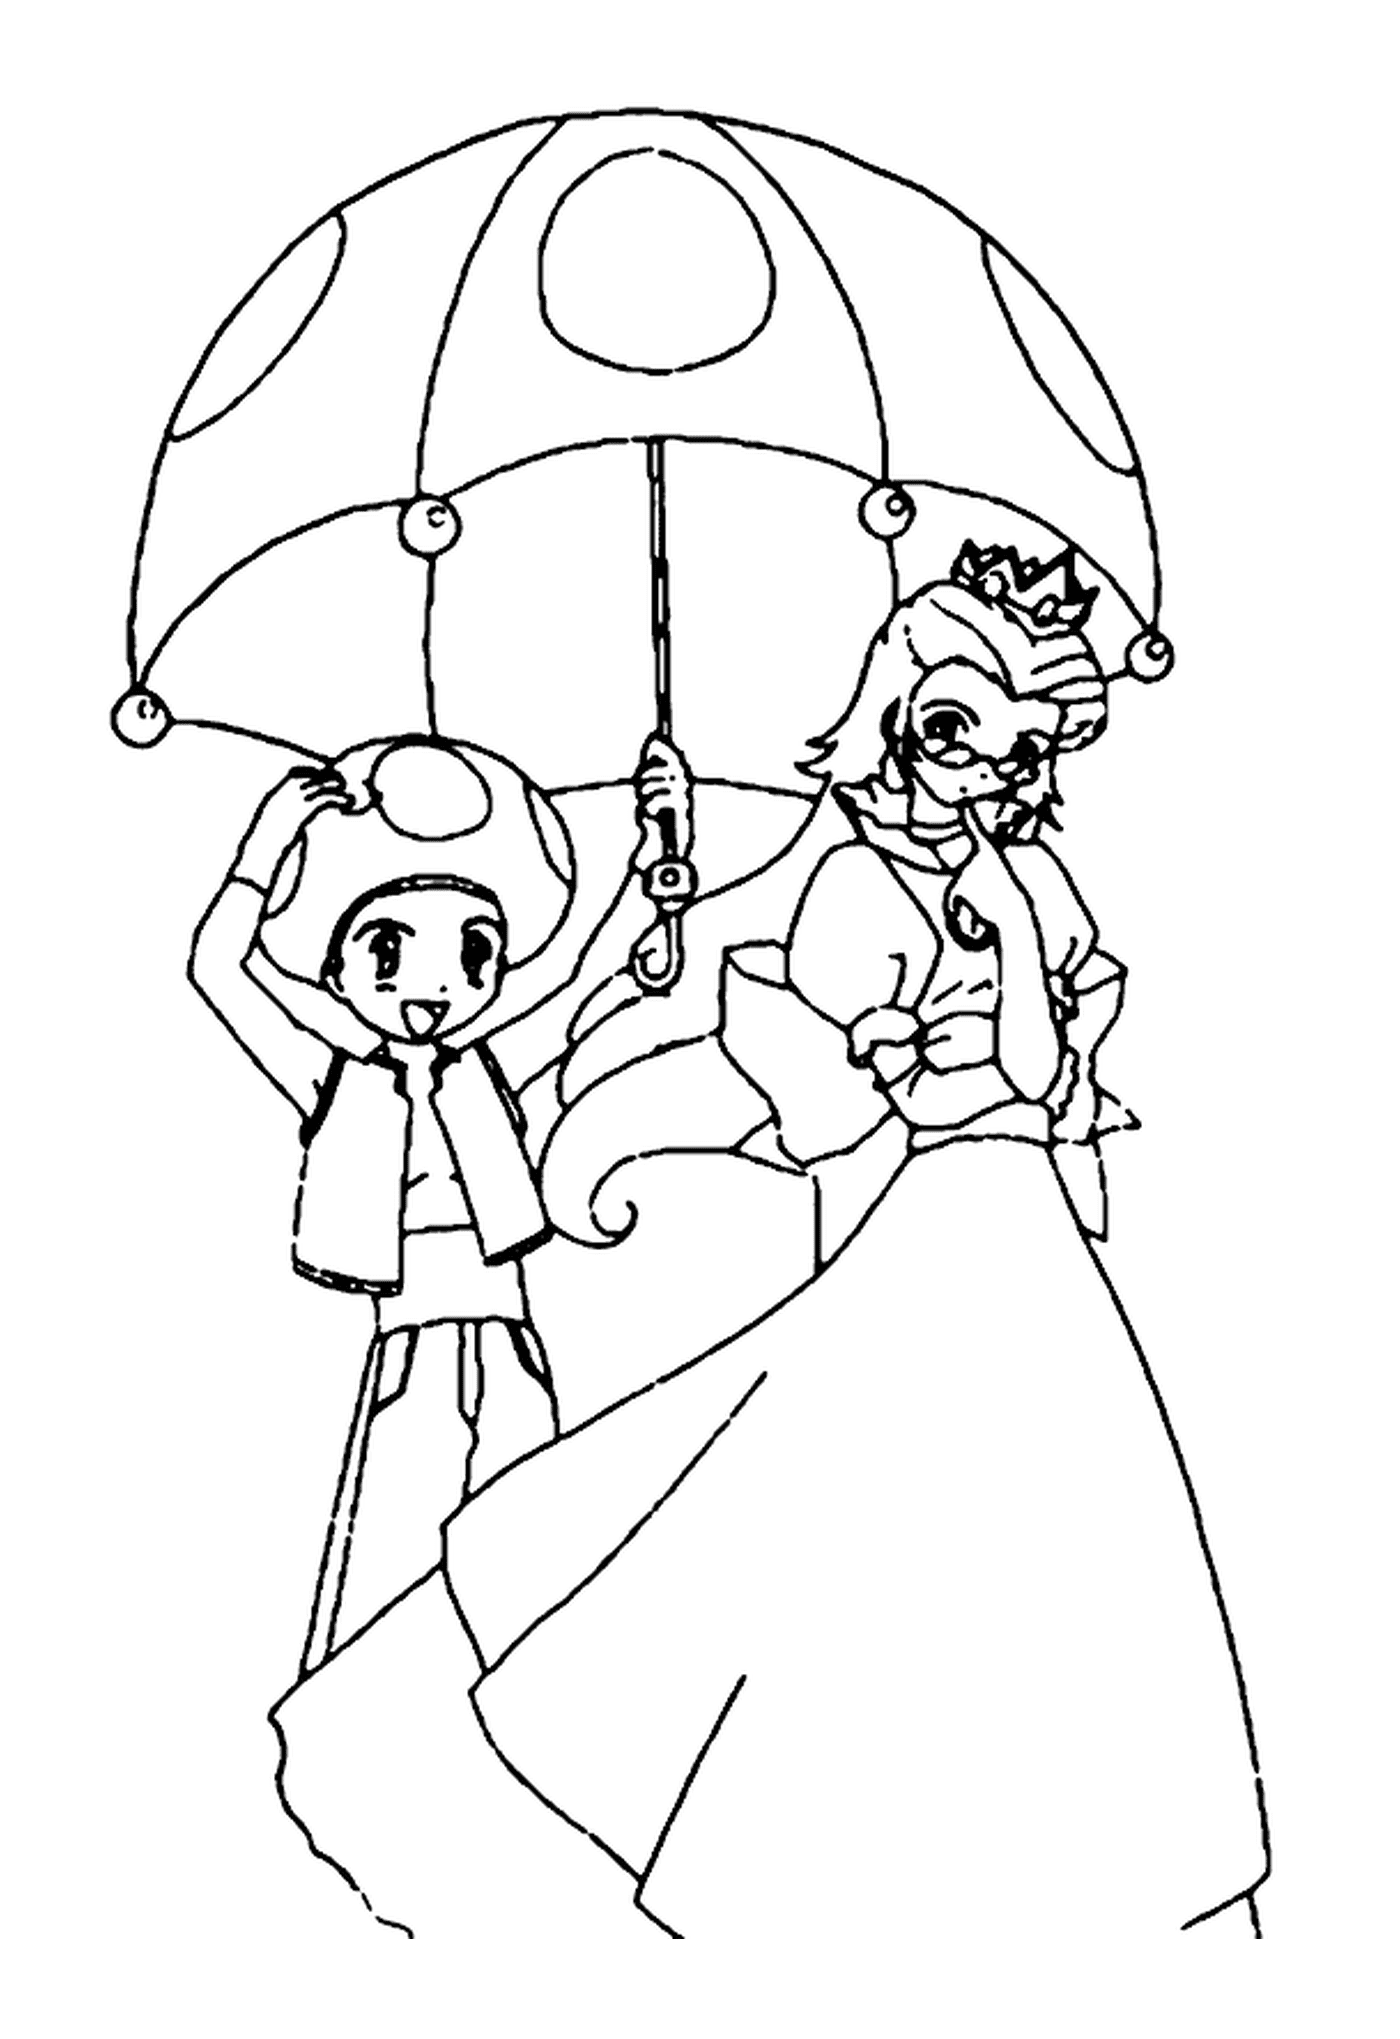  The princess and Toad, an elderly woman holding an umbrella and a young boy holding an umbrella 